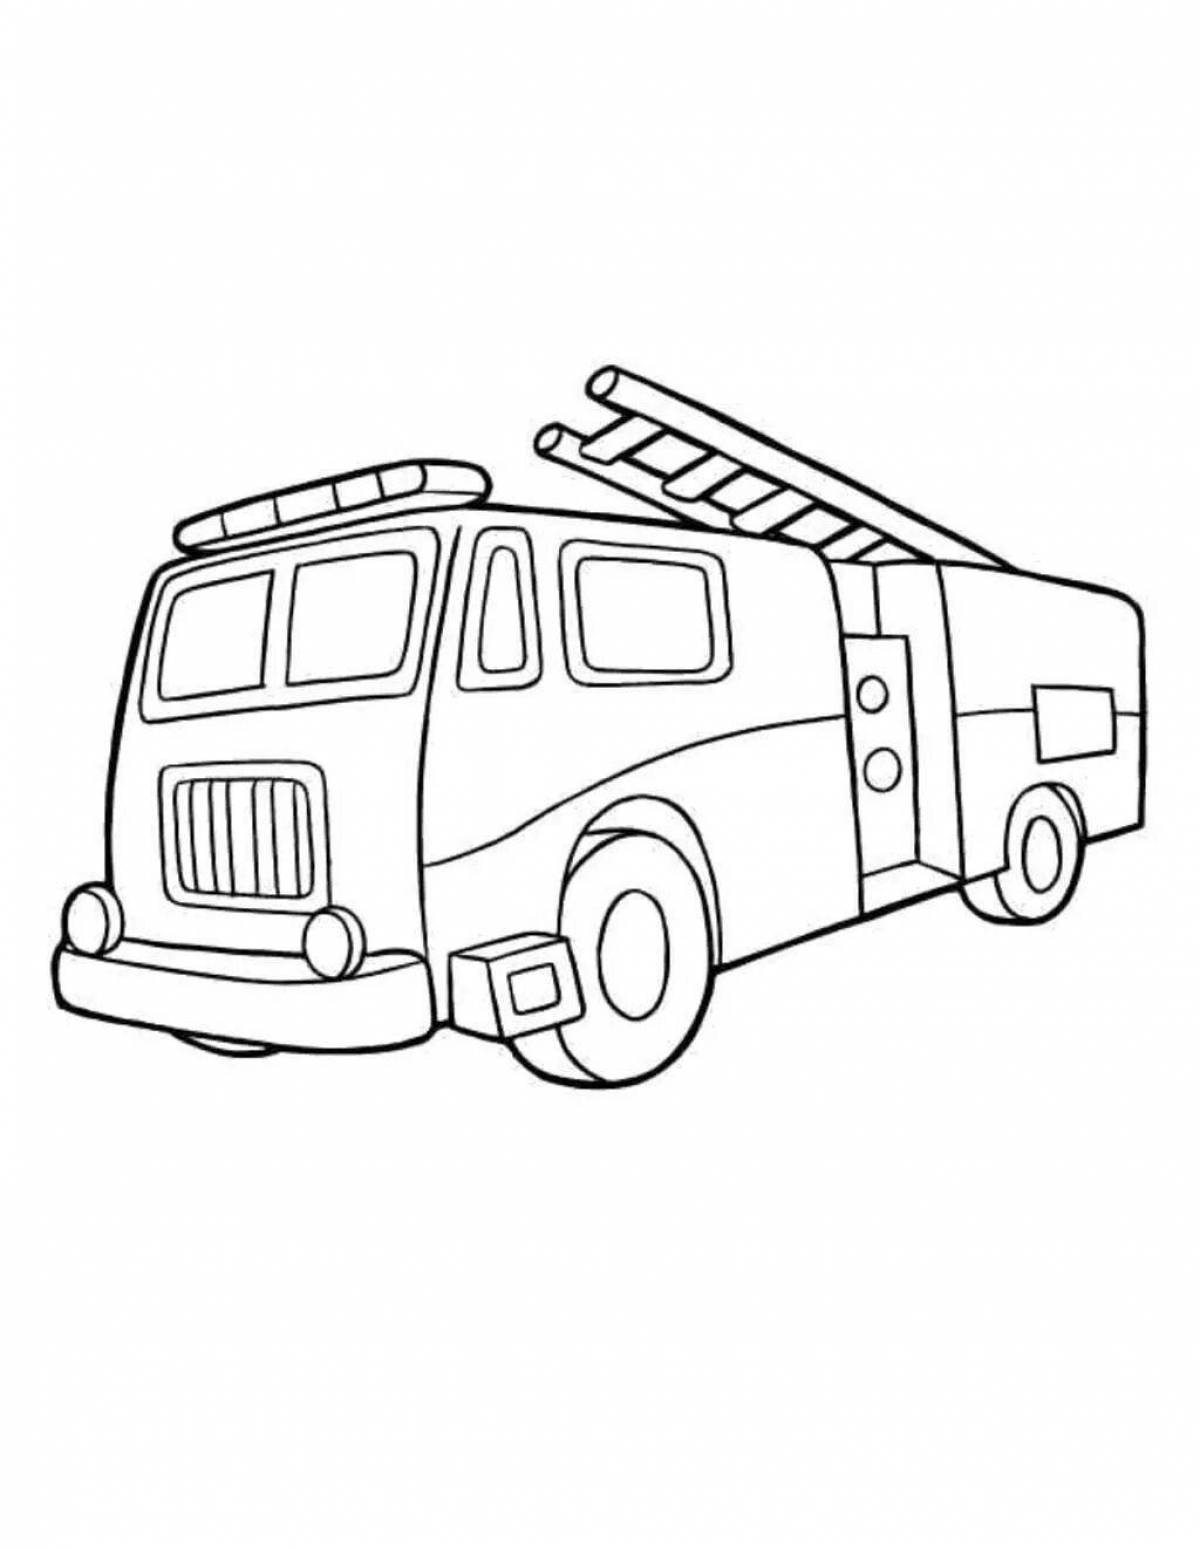 Adorable fire truck coloring book for kids